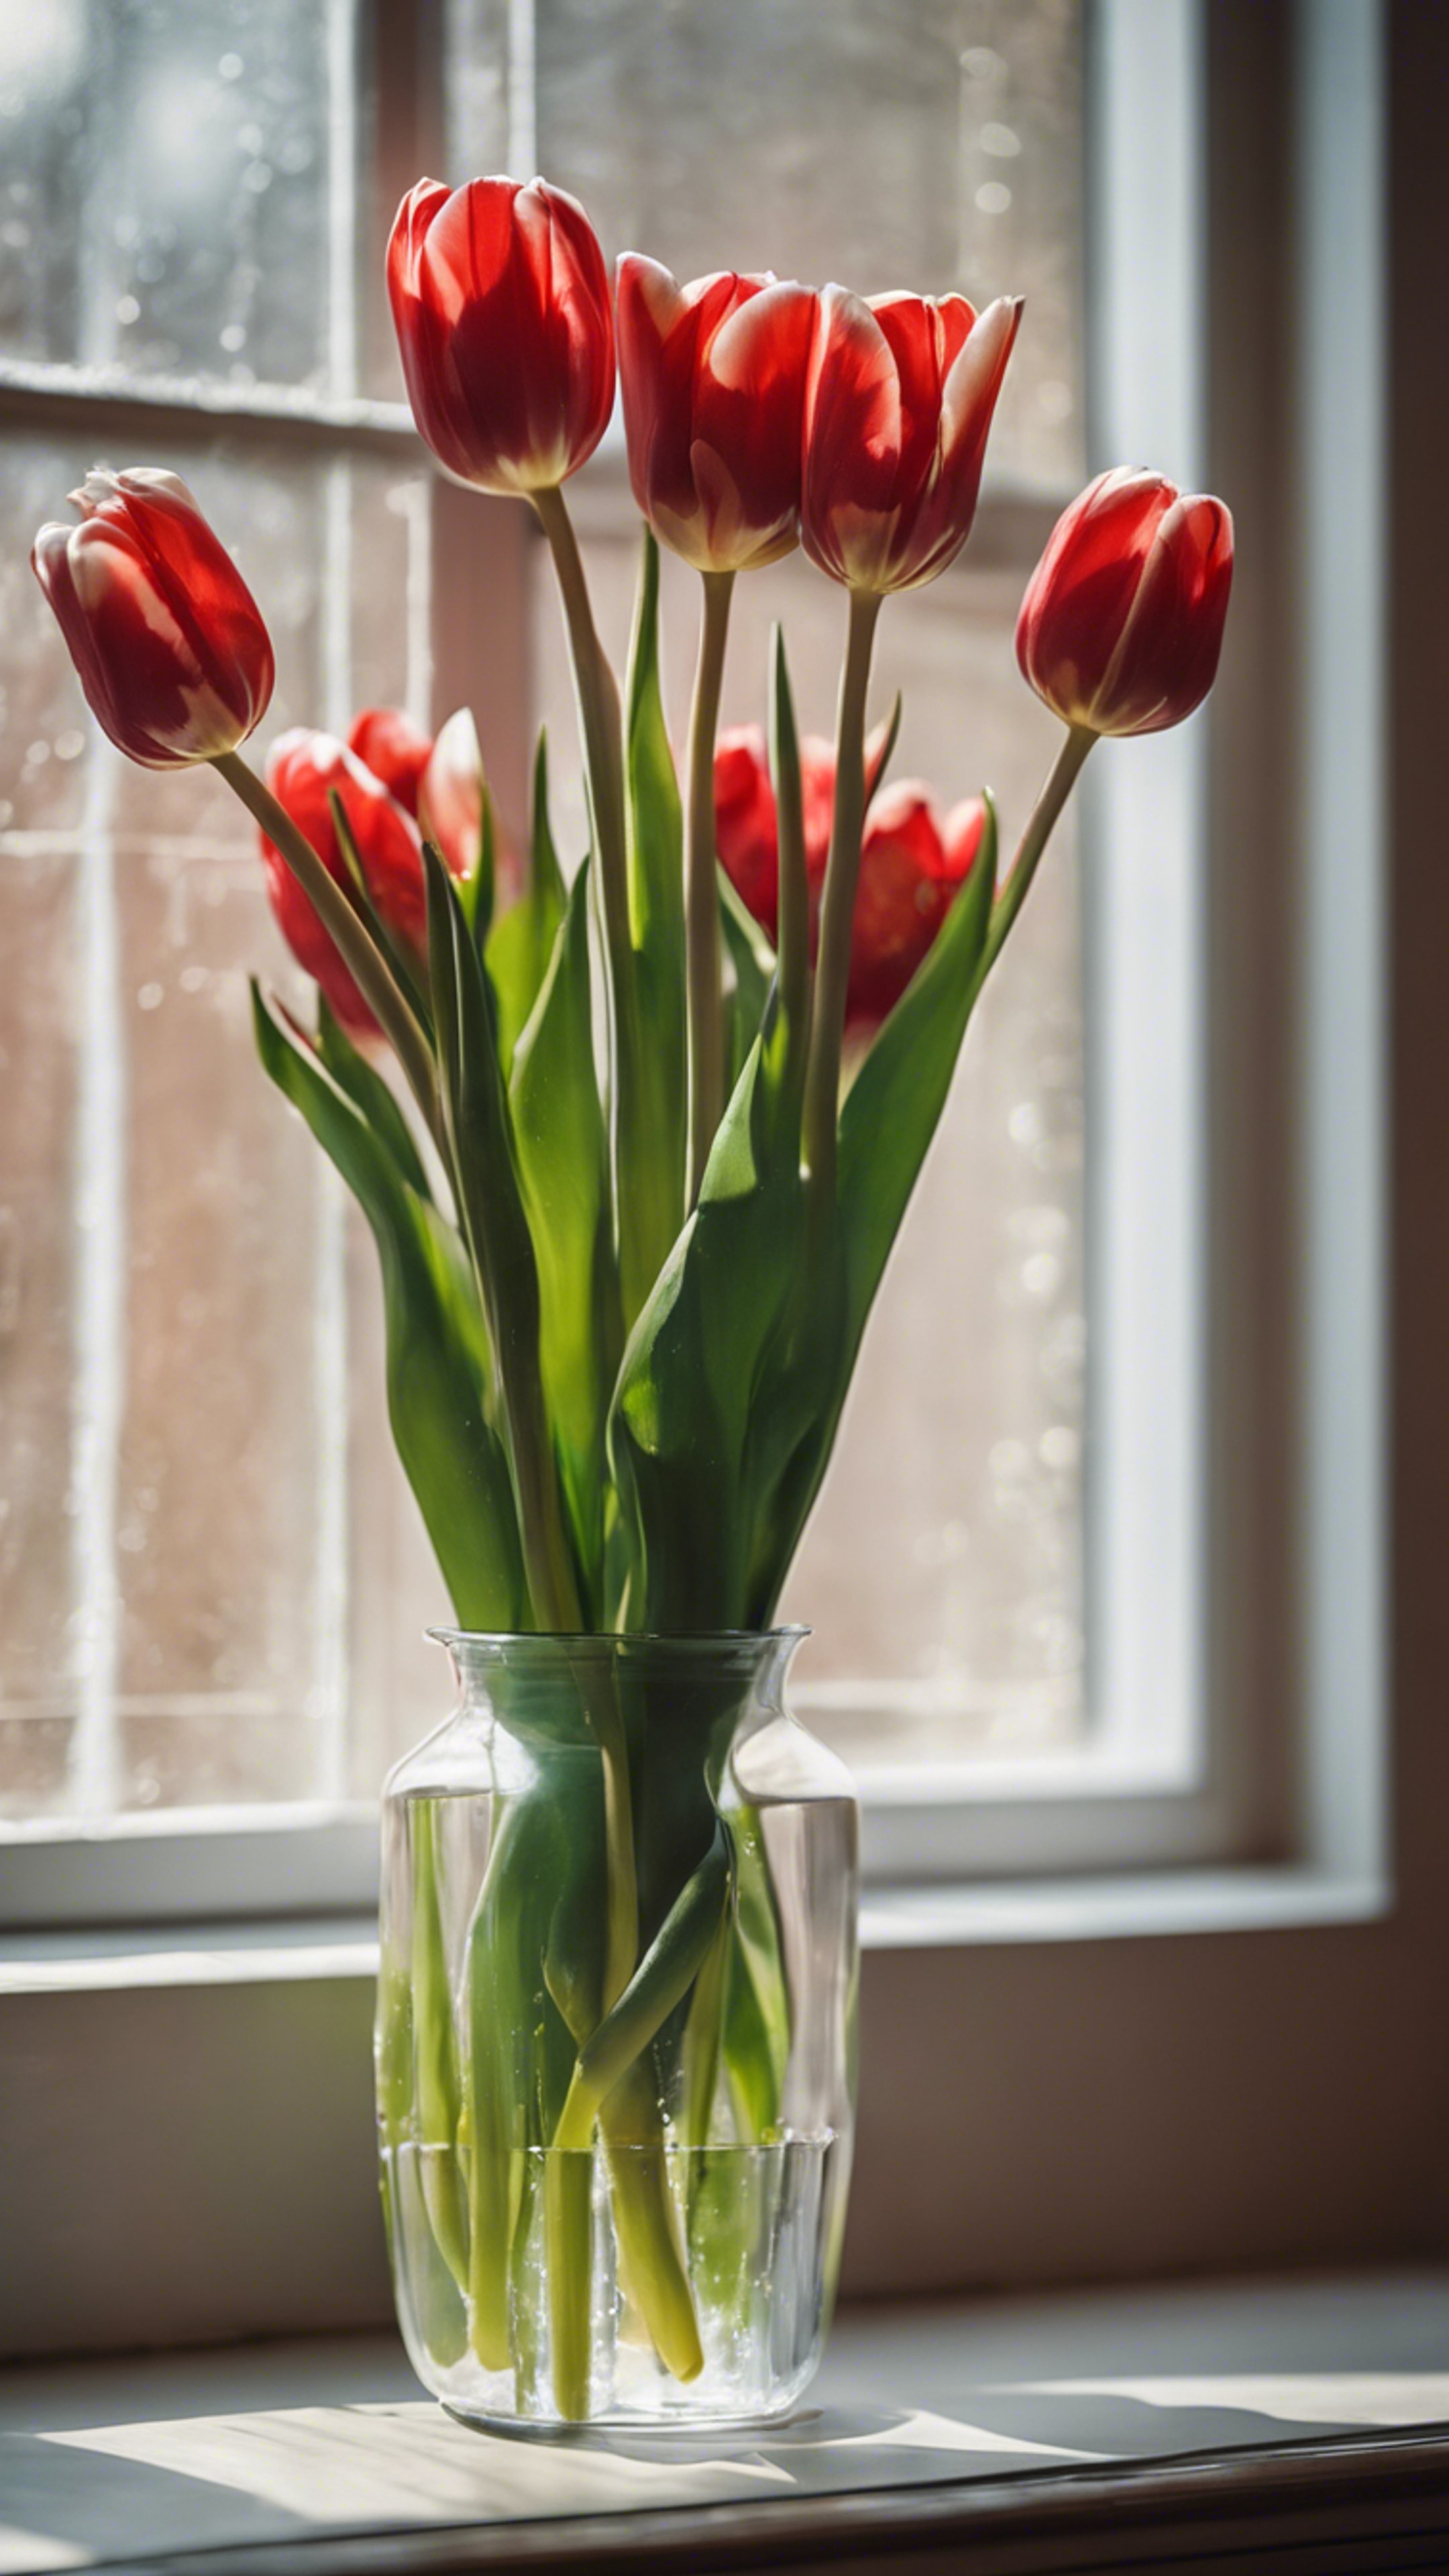 A bunch of vivid red and white tulips in a glass vase, lit by natural light. ورق الجدران[fc69acd6917c413b913f]